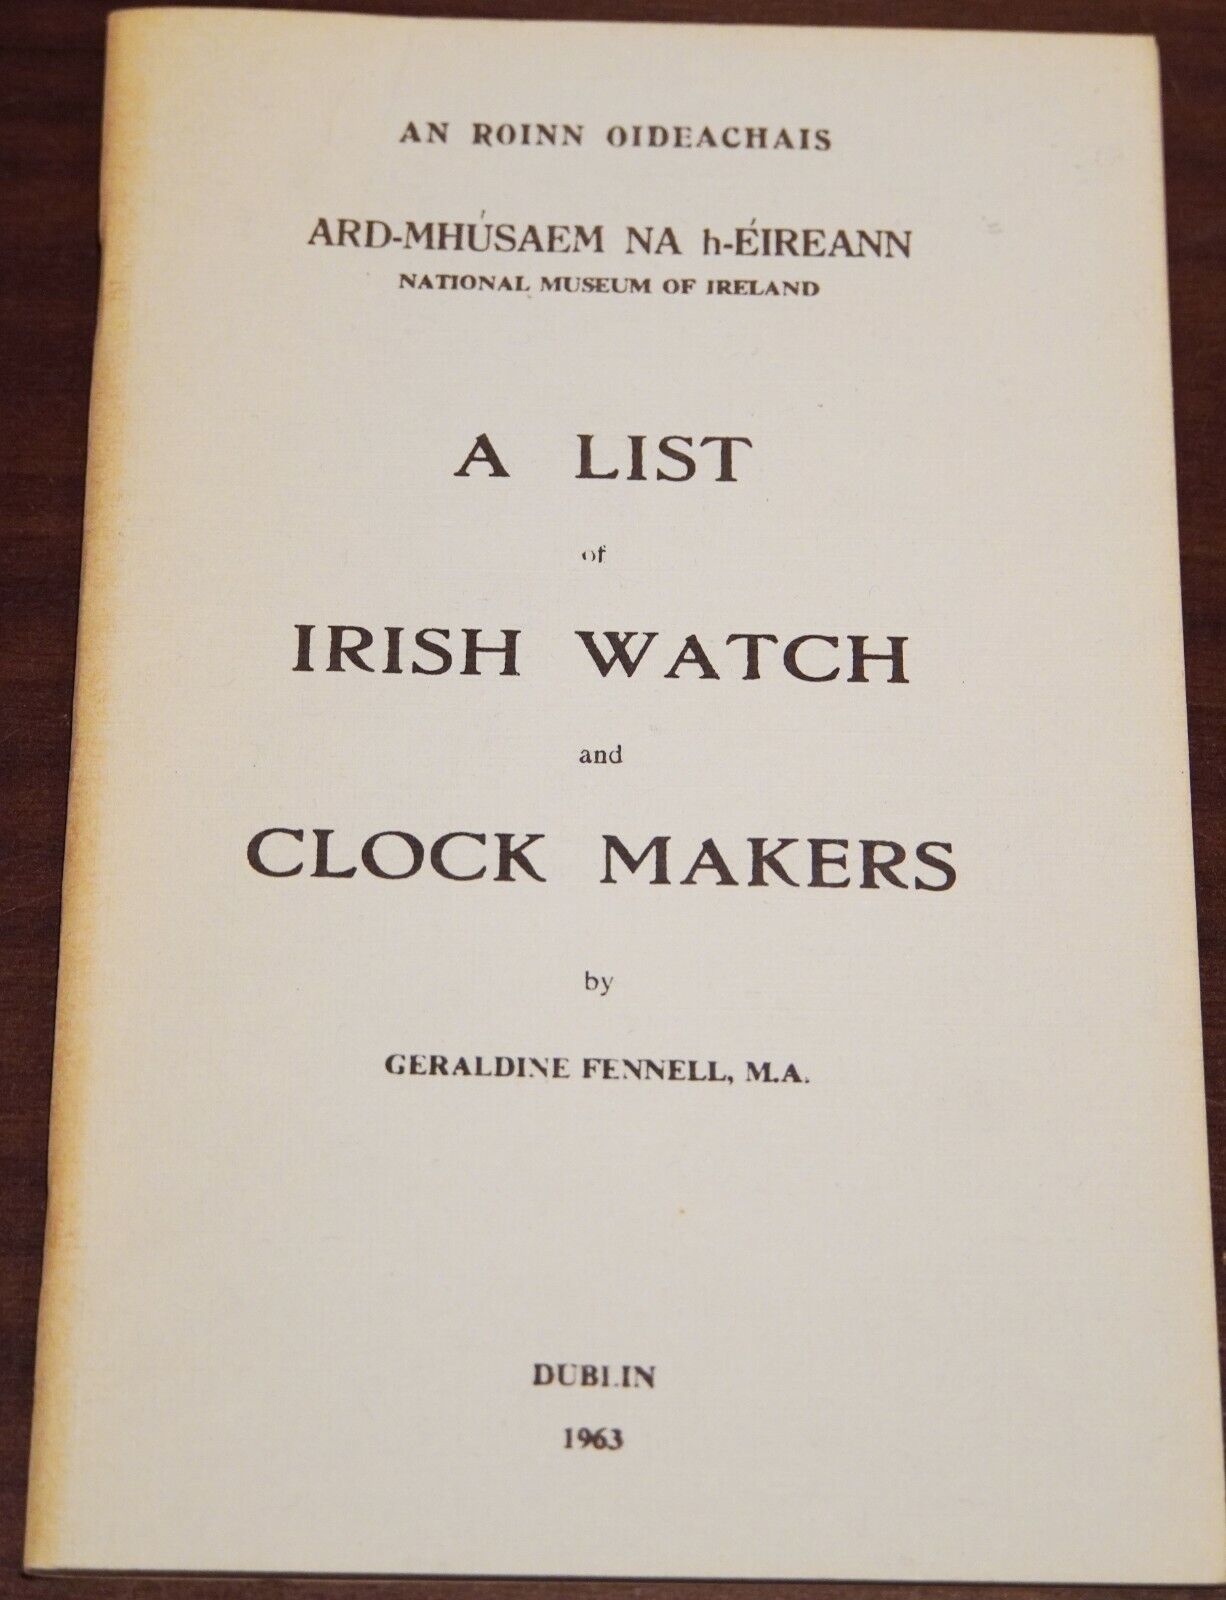 A List of Irish Watch and Clock Makers by Geraldine Fennell, M.A.